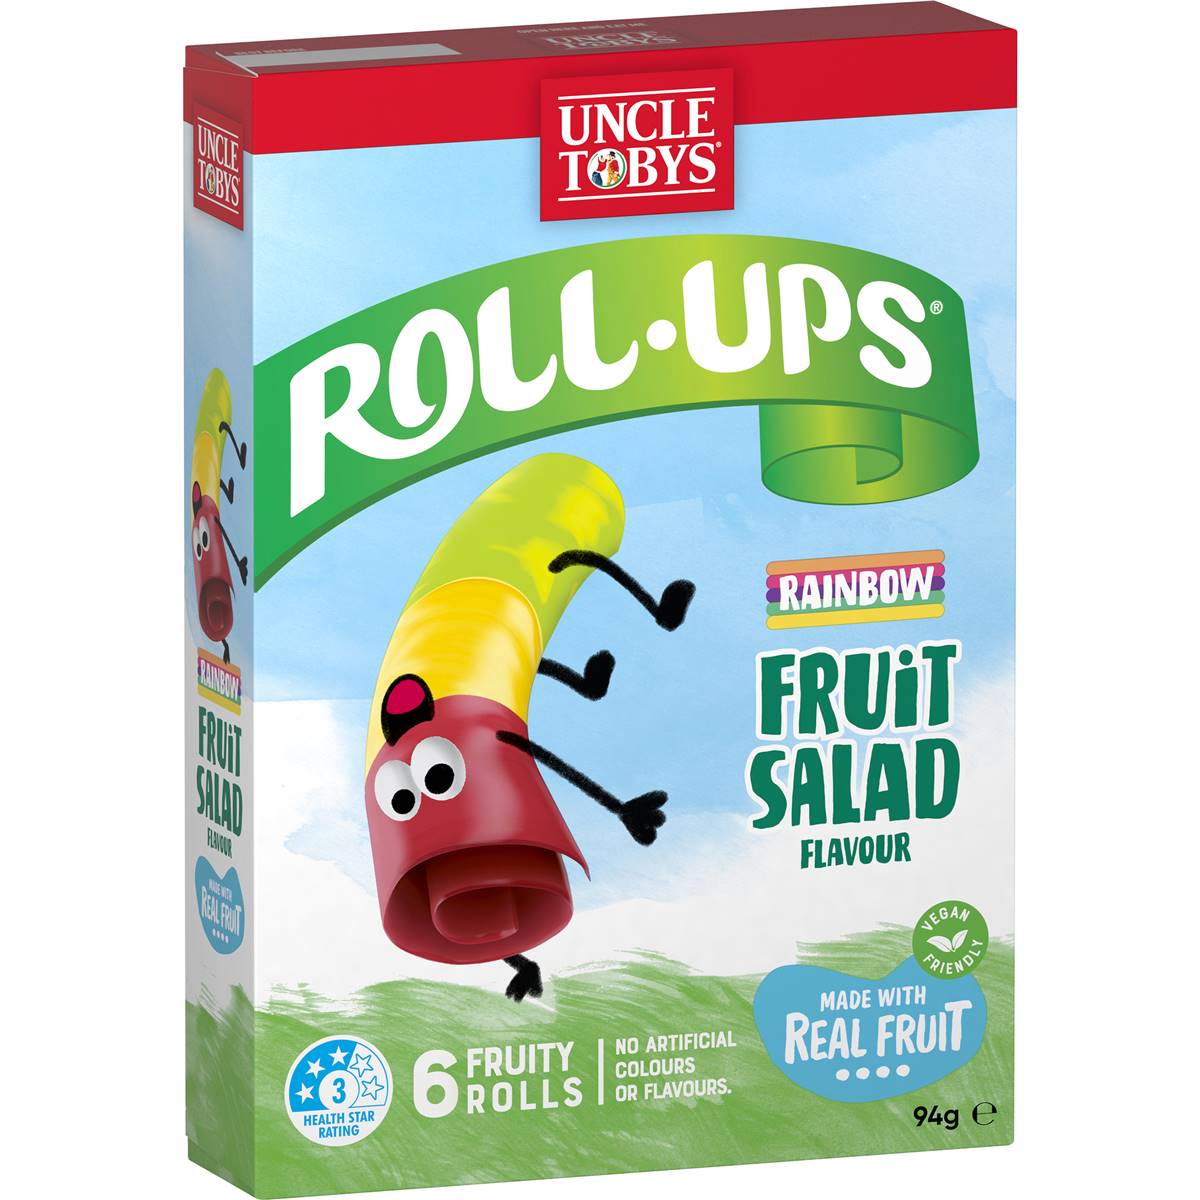 Calories in Uncle Tobys Roll-ups Rainbow Fruit Salad